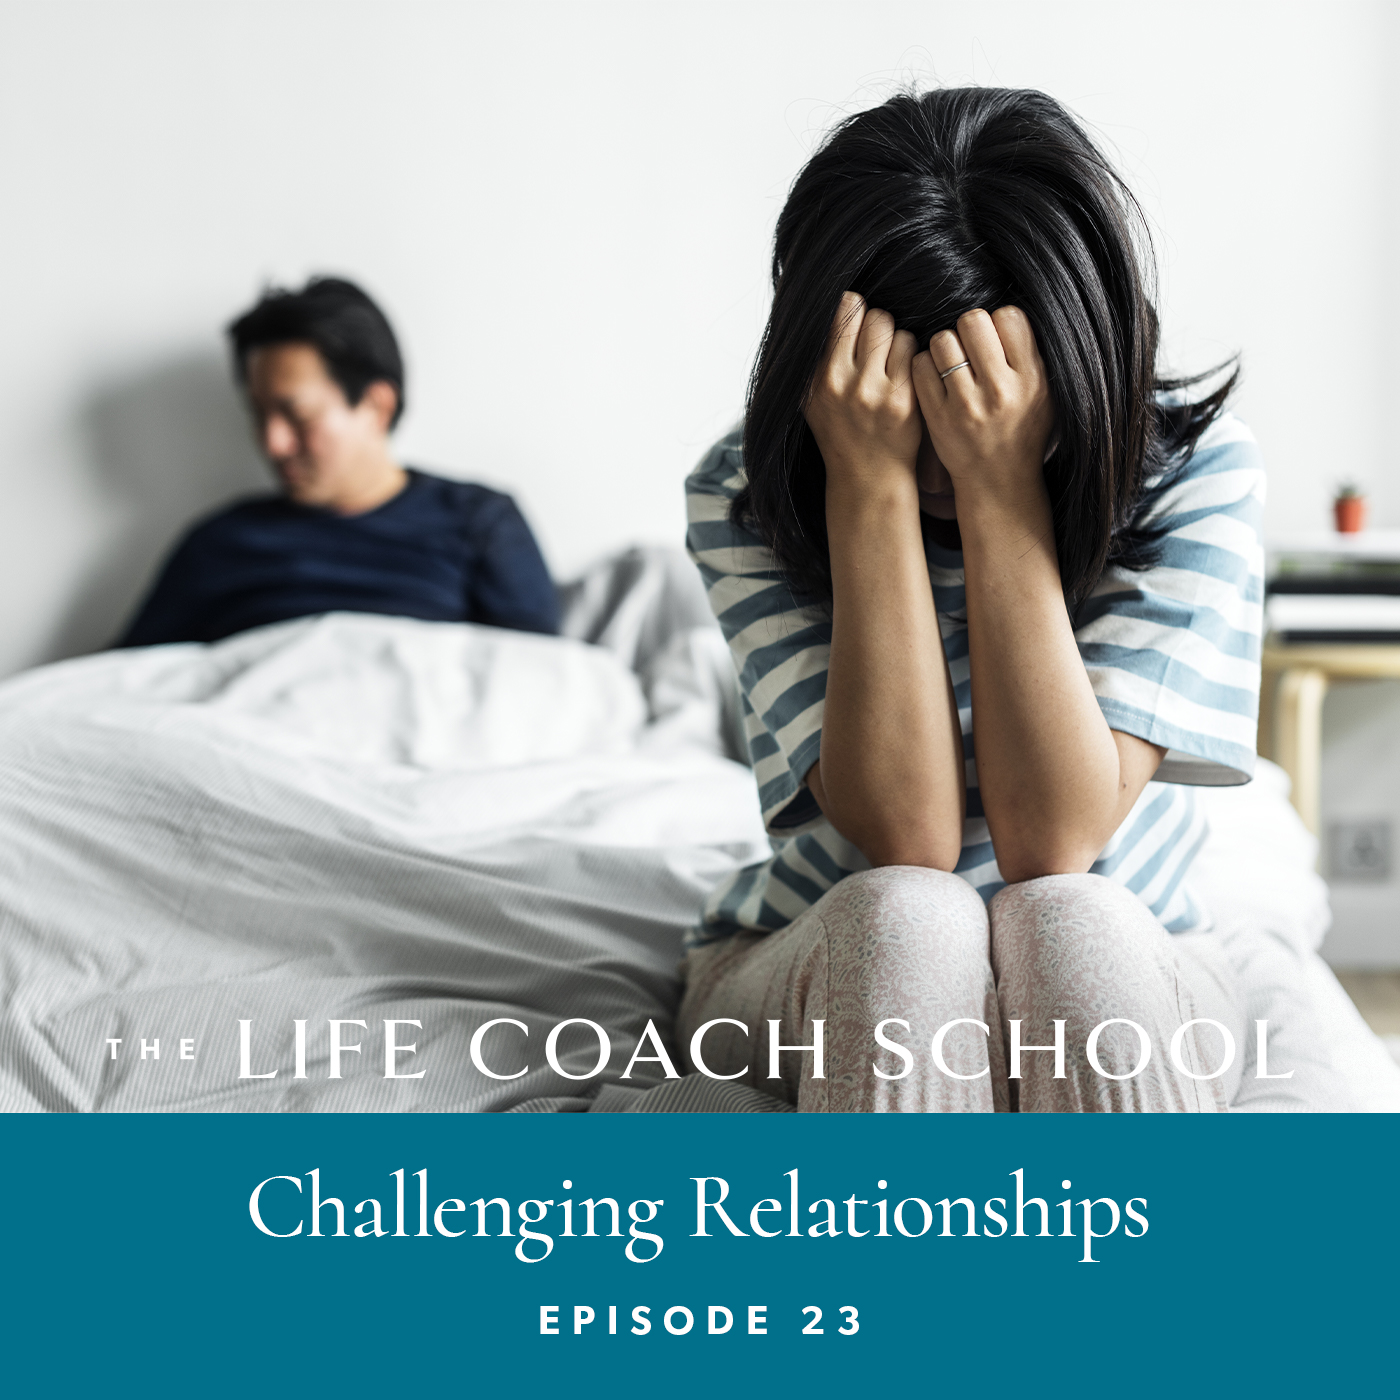 The Life Coach School Podcast with Brooke Castillo | Episode 23 | Challenging Relationships